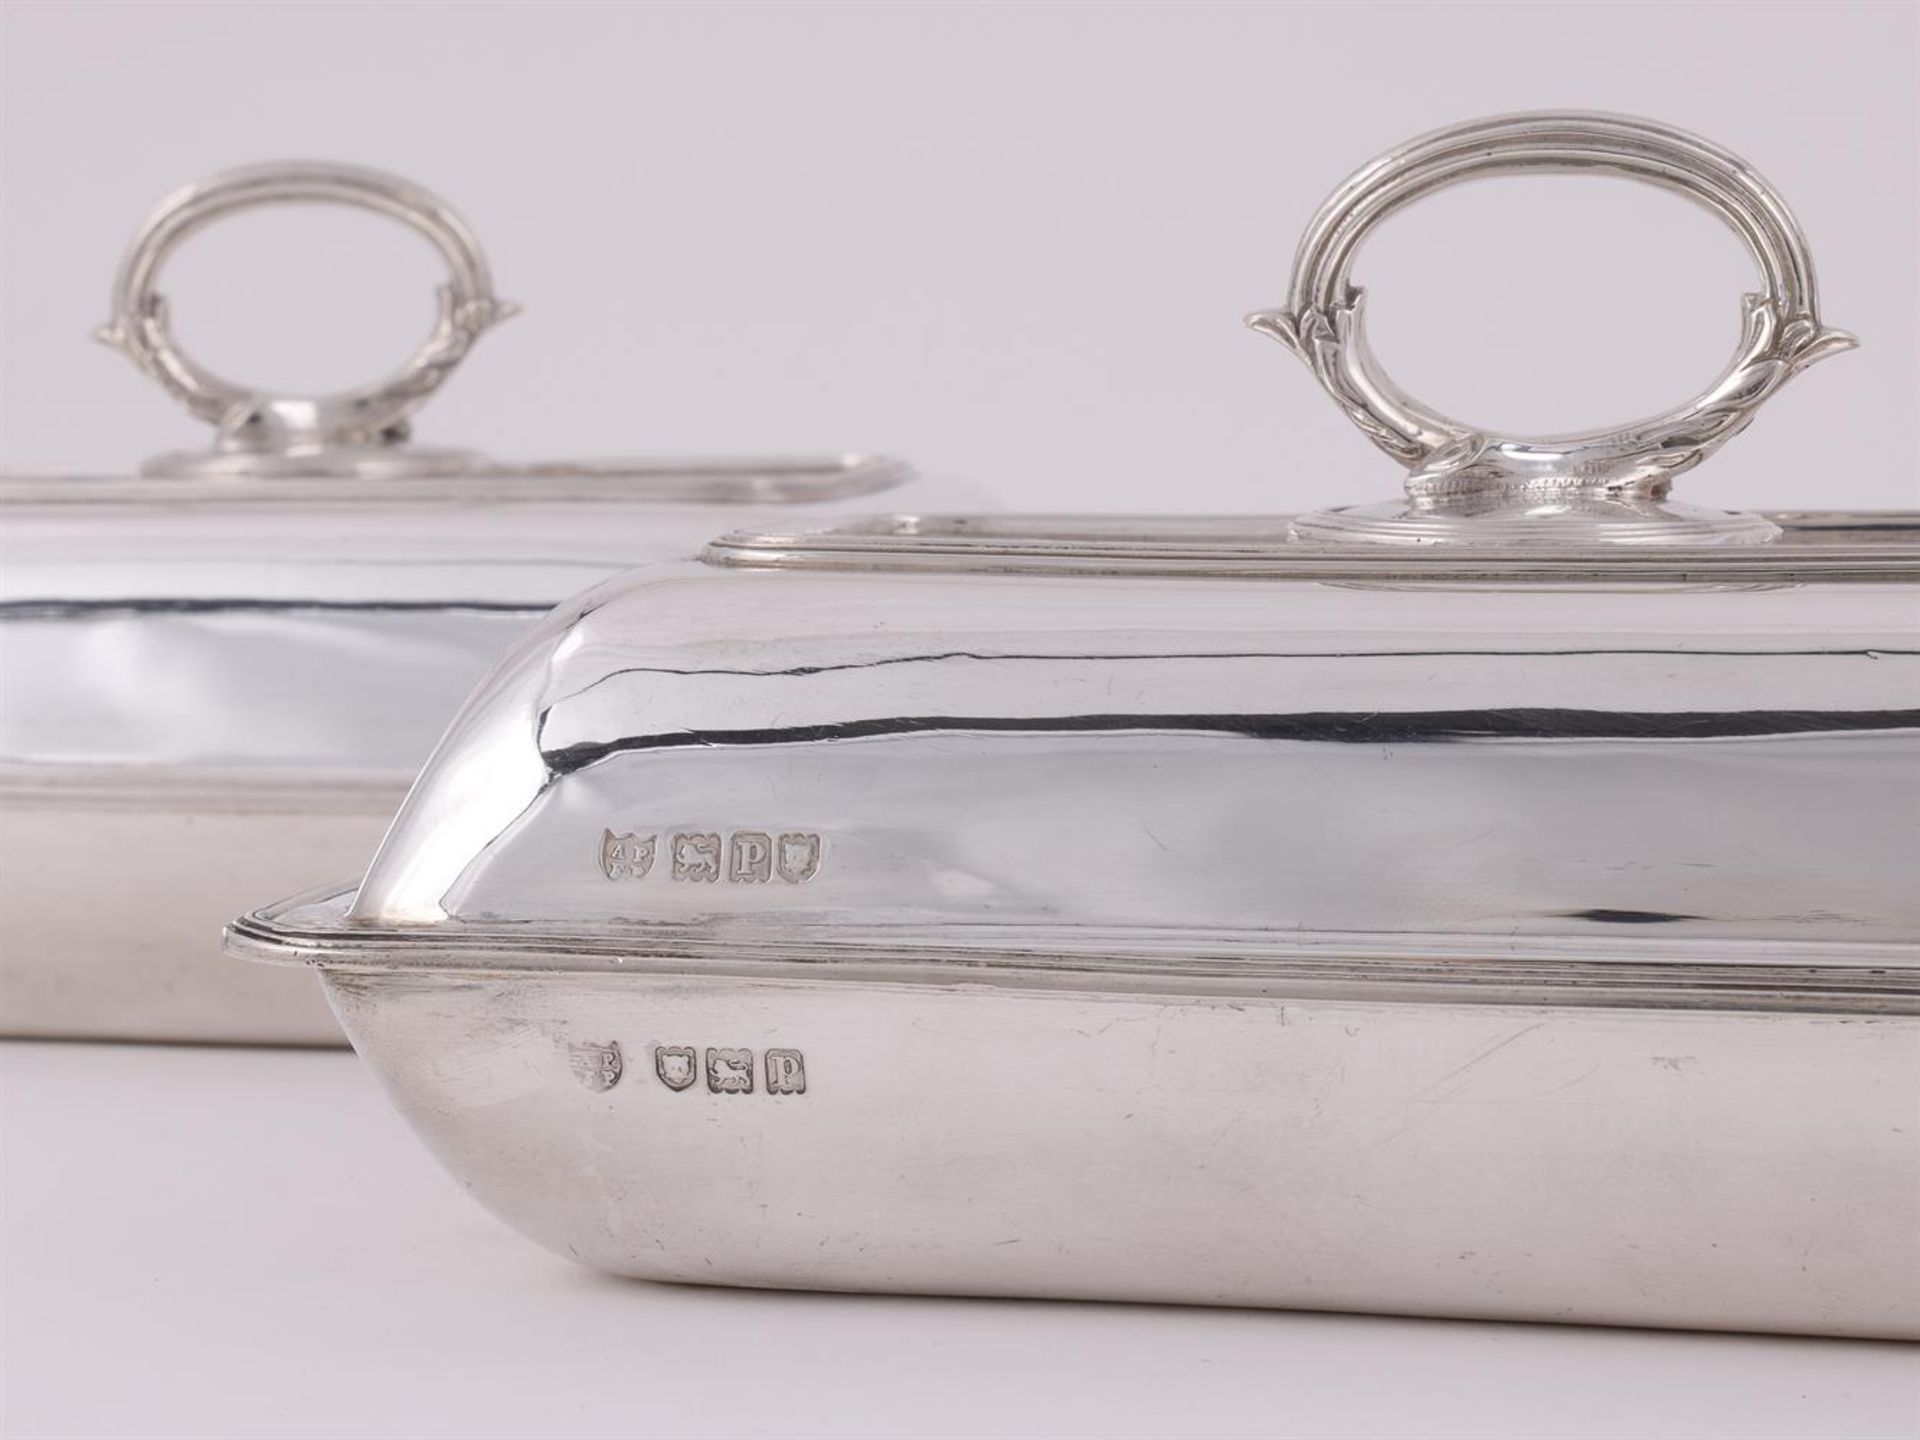 A PAIR OF SILVER ENTREE DISHES, COVERS AND HANDLES - Image 3 of 3